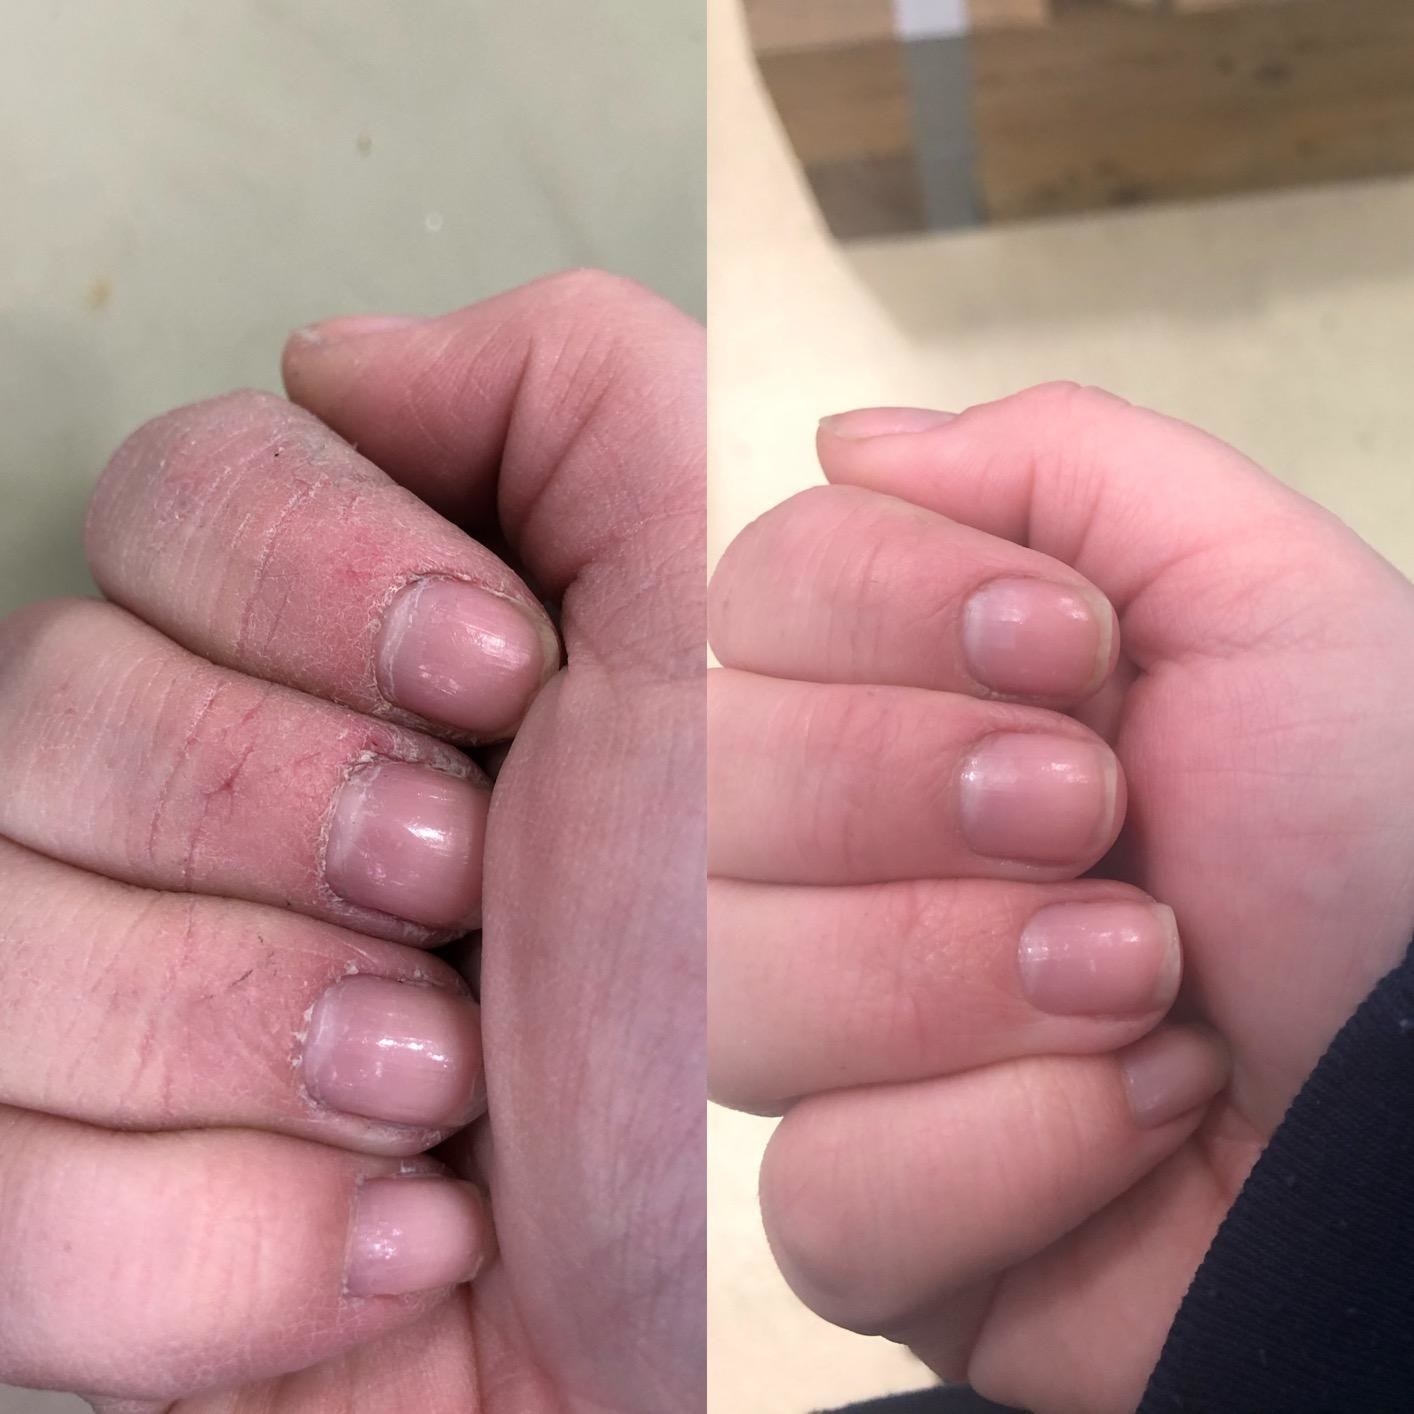 Reviewer showing cracked hands and soft hands after using the lotion